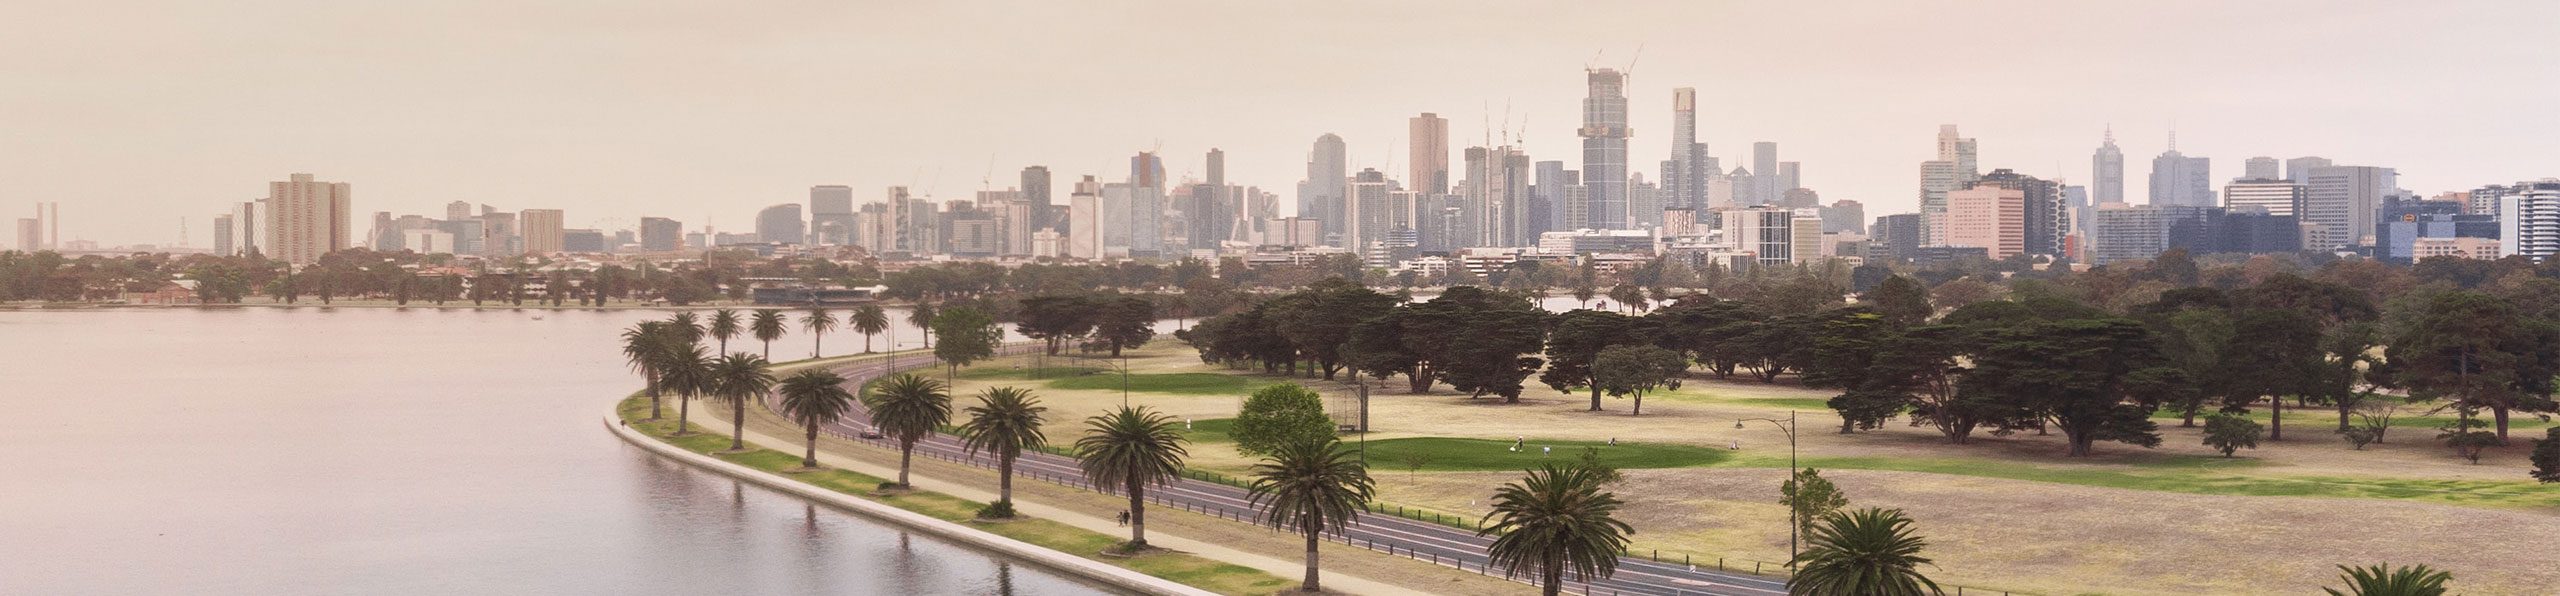 view of melbourne city with water and palmtrees by the road